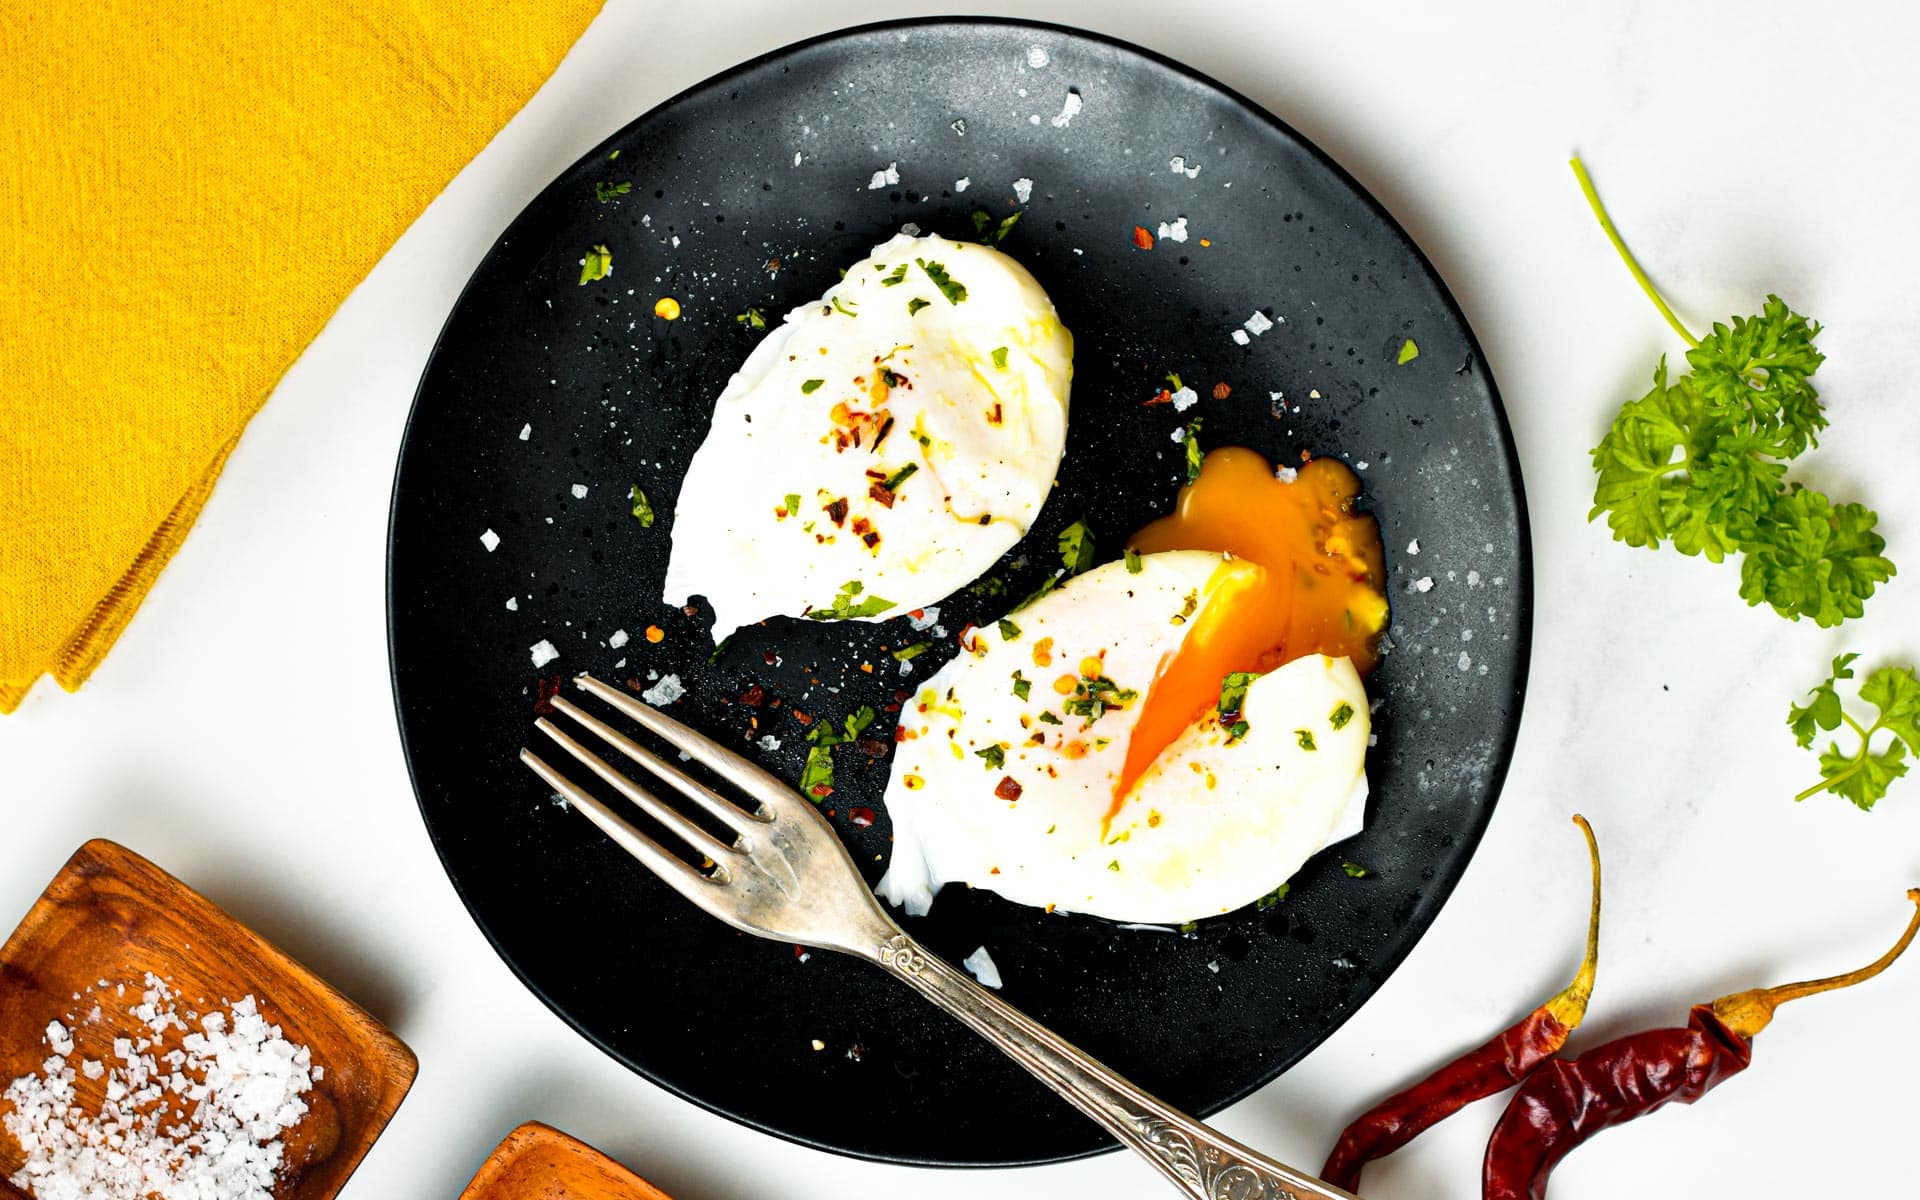 Poached eggs on a black plate with a fork.